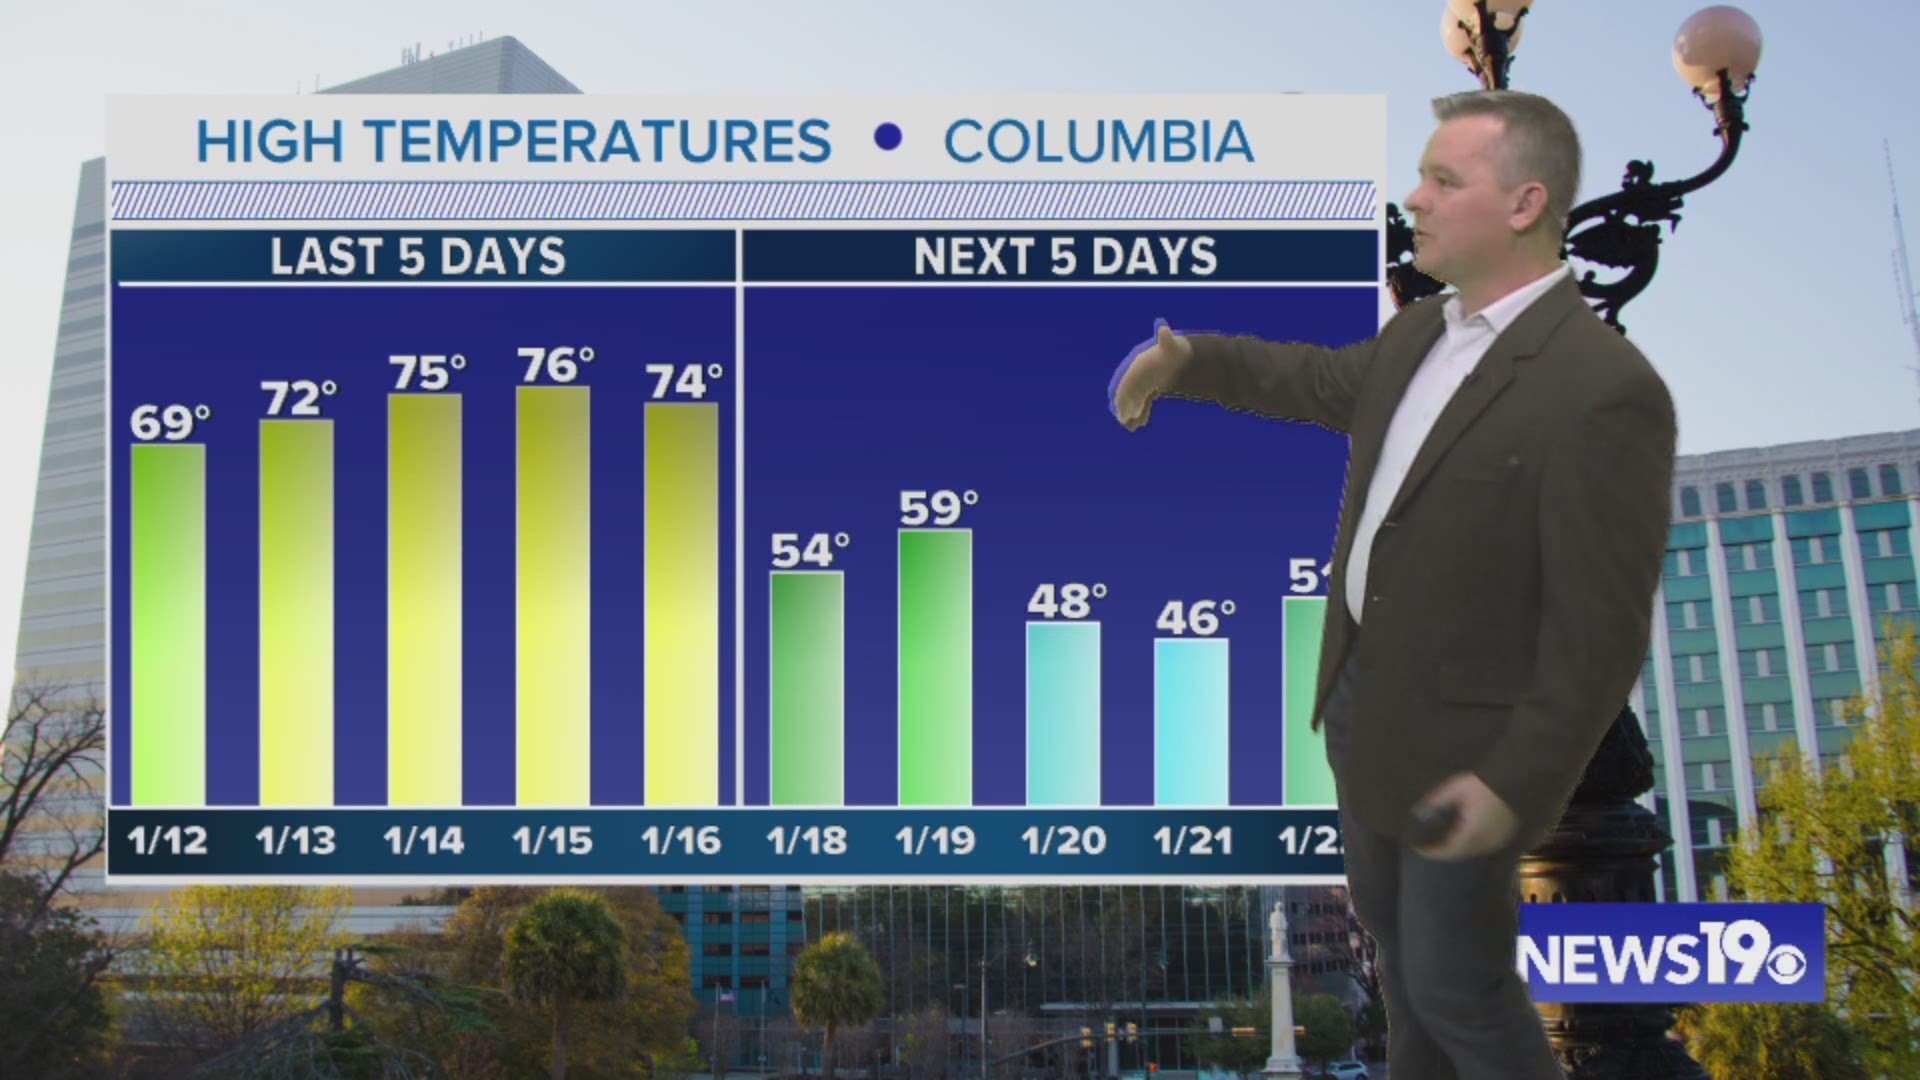 Some rain over the weekend, some sunshine too. Significantly colder weather next week.